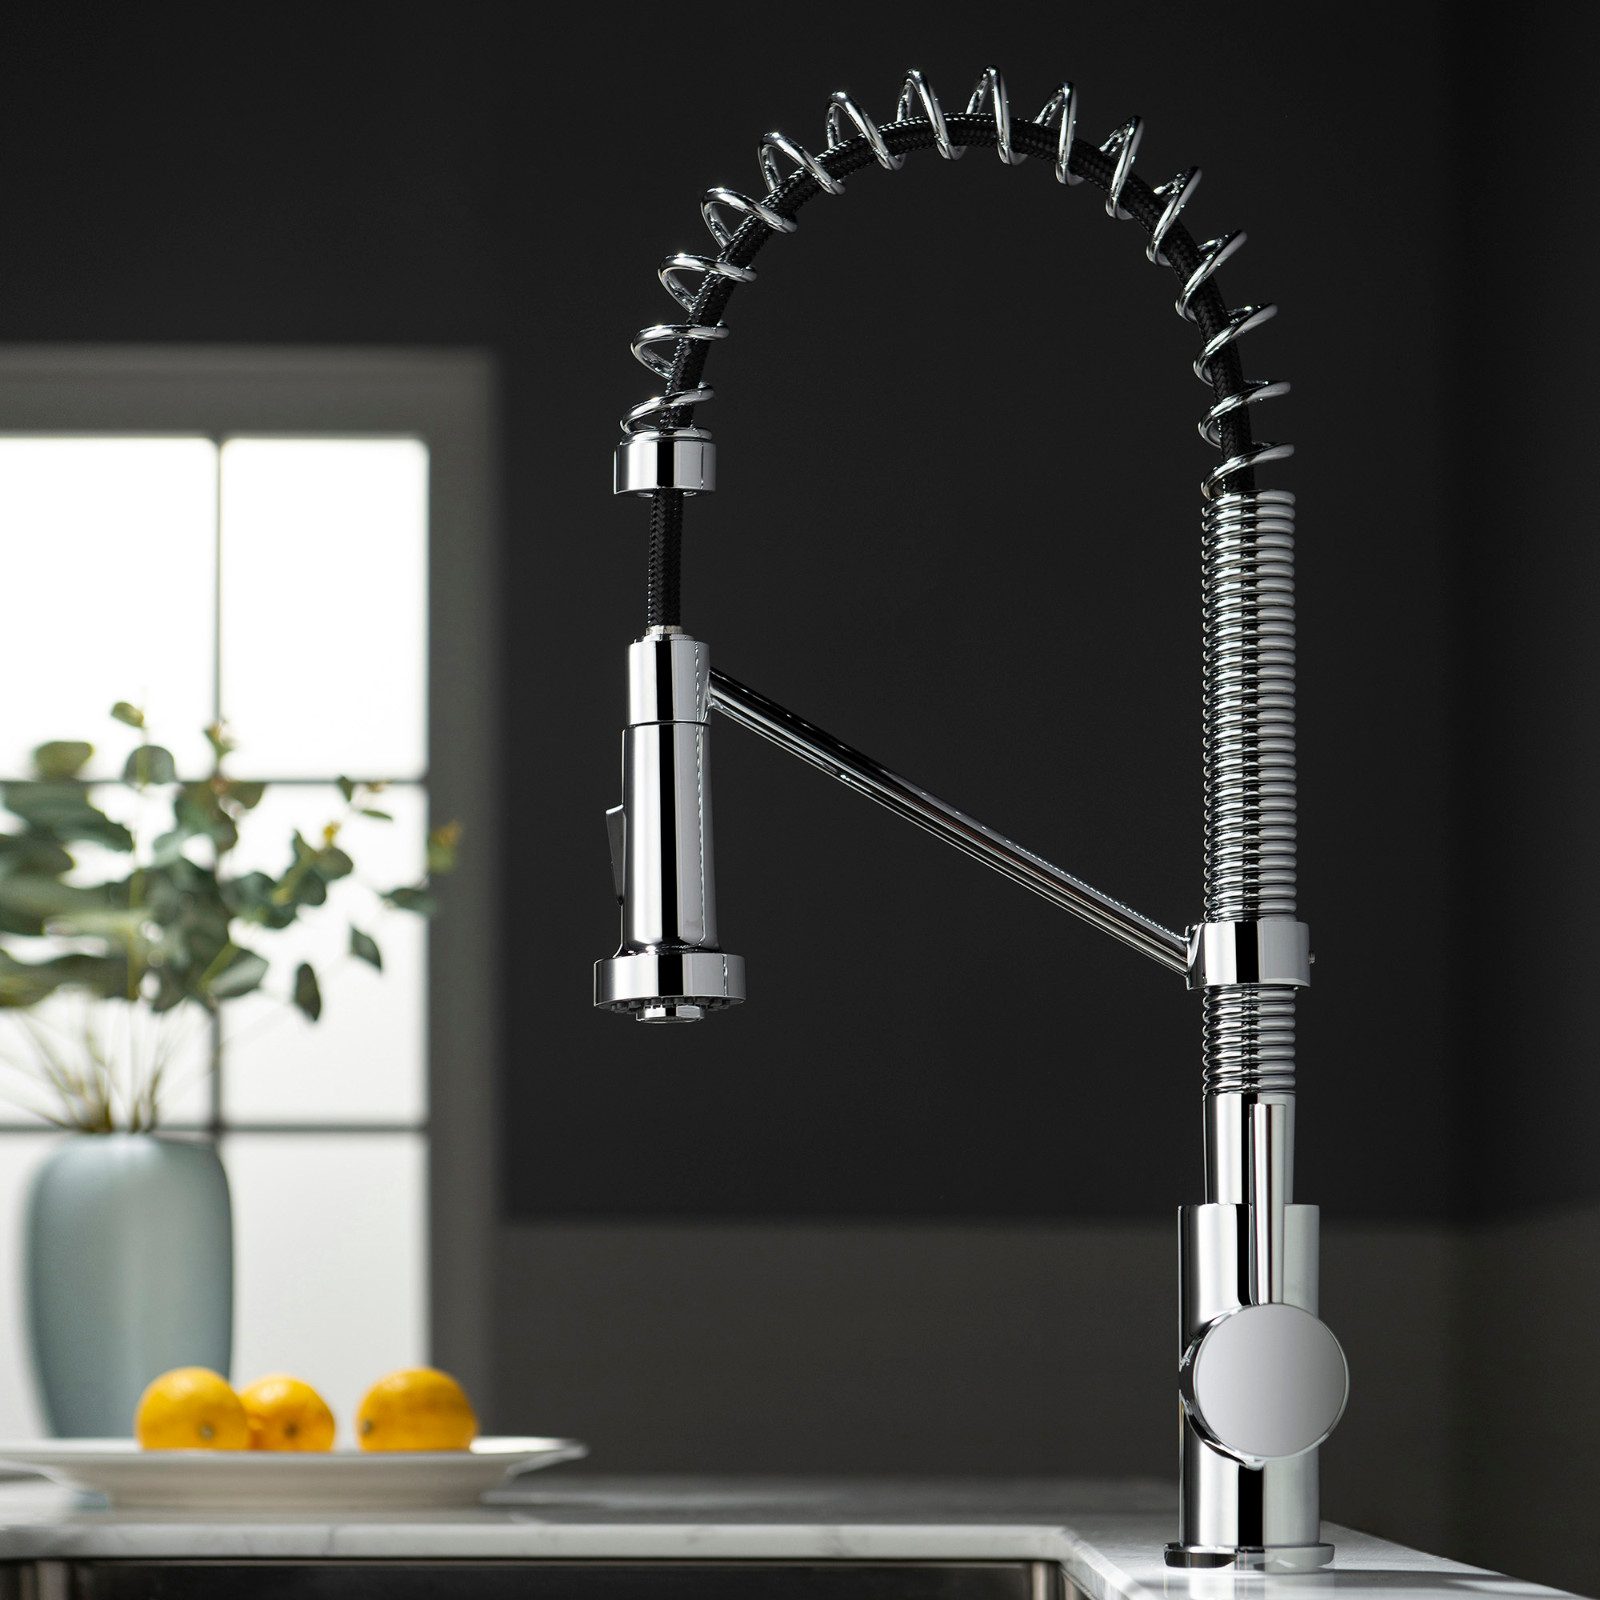  WOODBRIDGE WK010203CH Stainless Steel Single Handle Spring Coil Pre-Rinse Kitchen Faucet with Pull Down Sprayer, Chrome Finish_9444